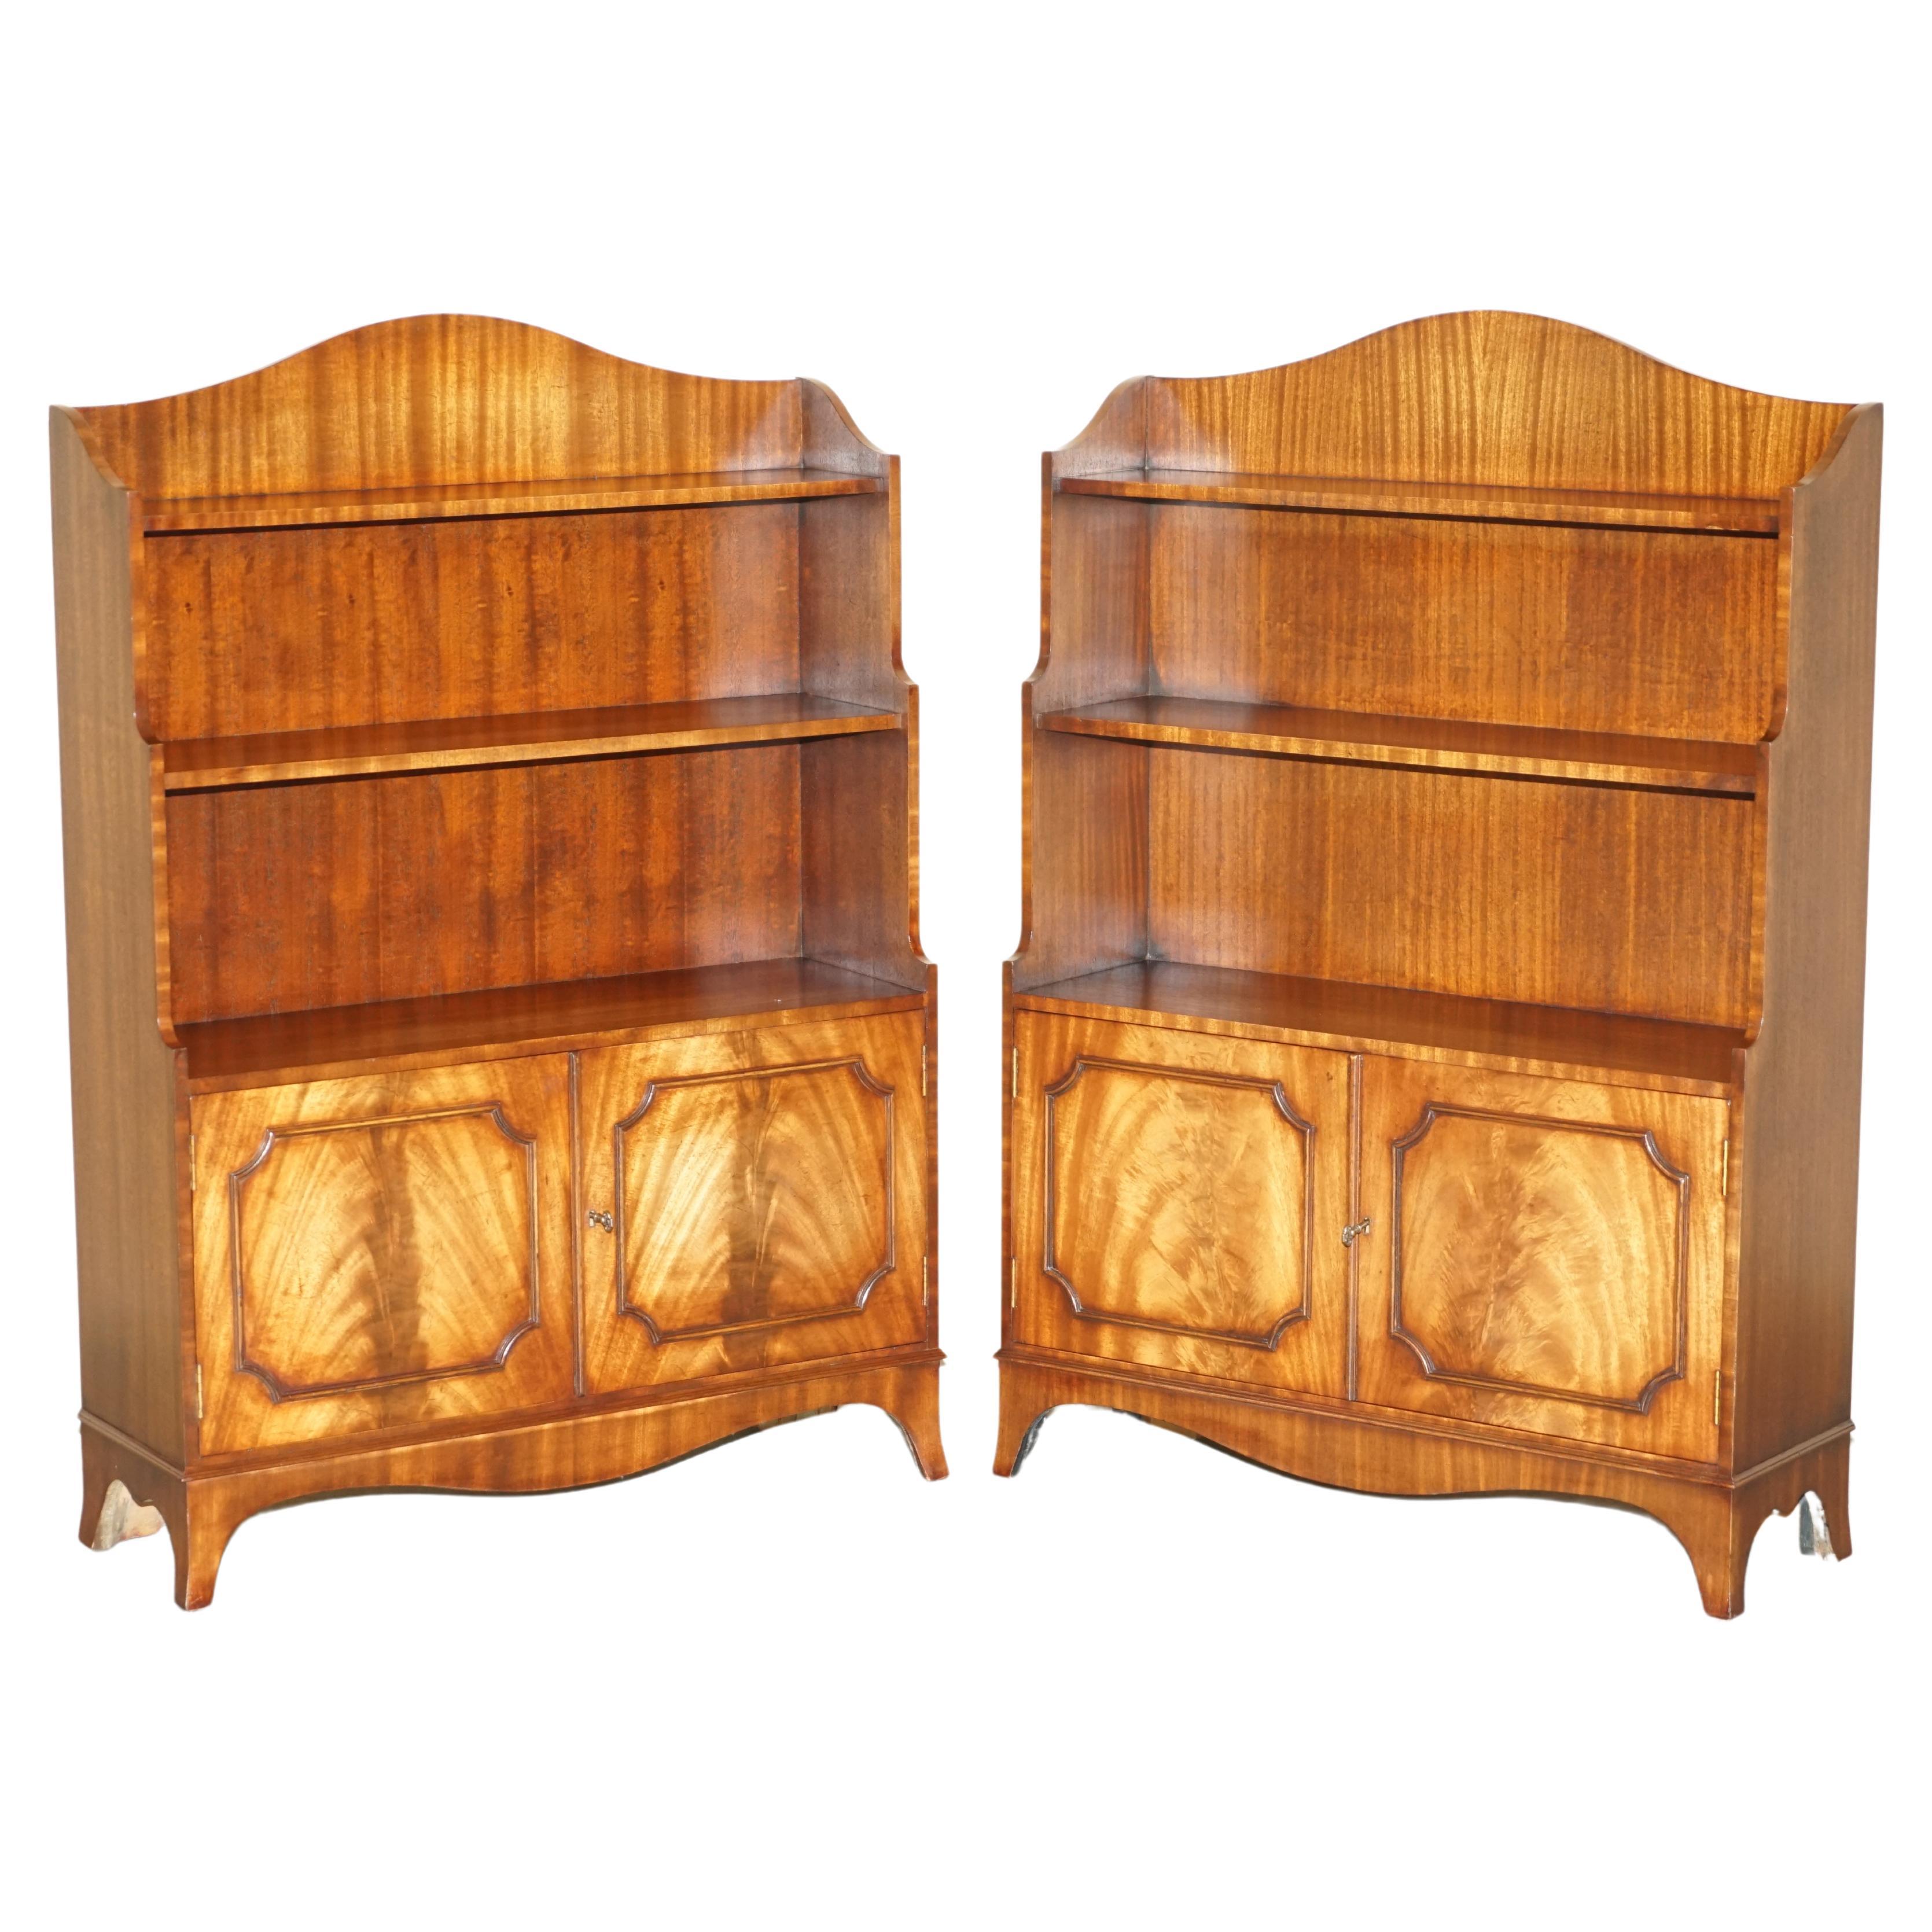 Stunning Pair of Flamed Hardwood Dwarf Waterfall Open Library Bookcases Cupboard